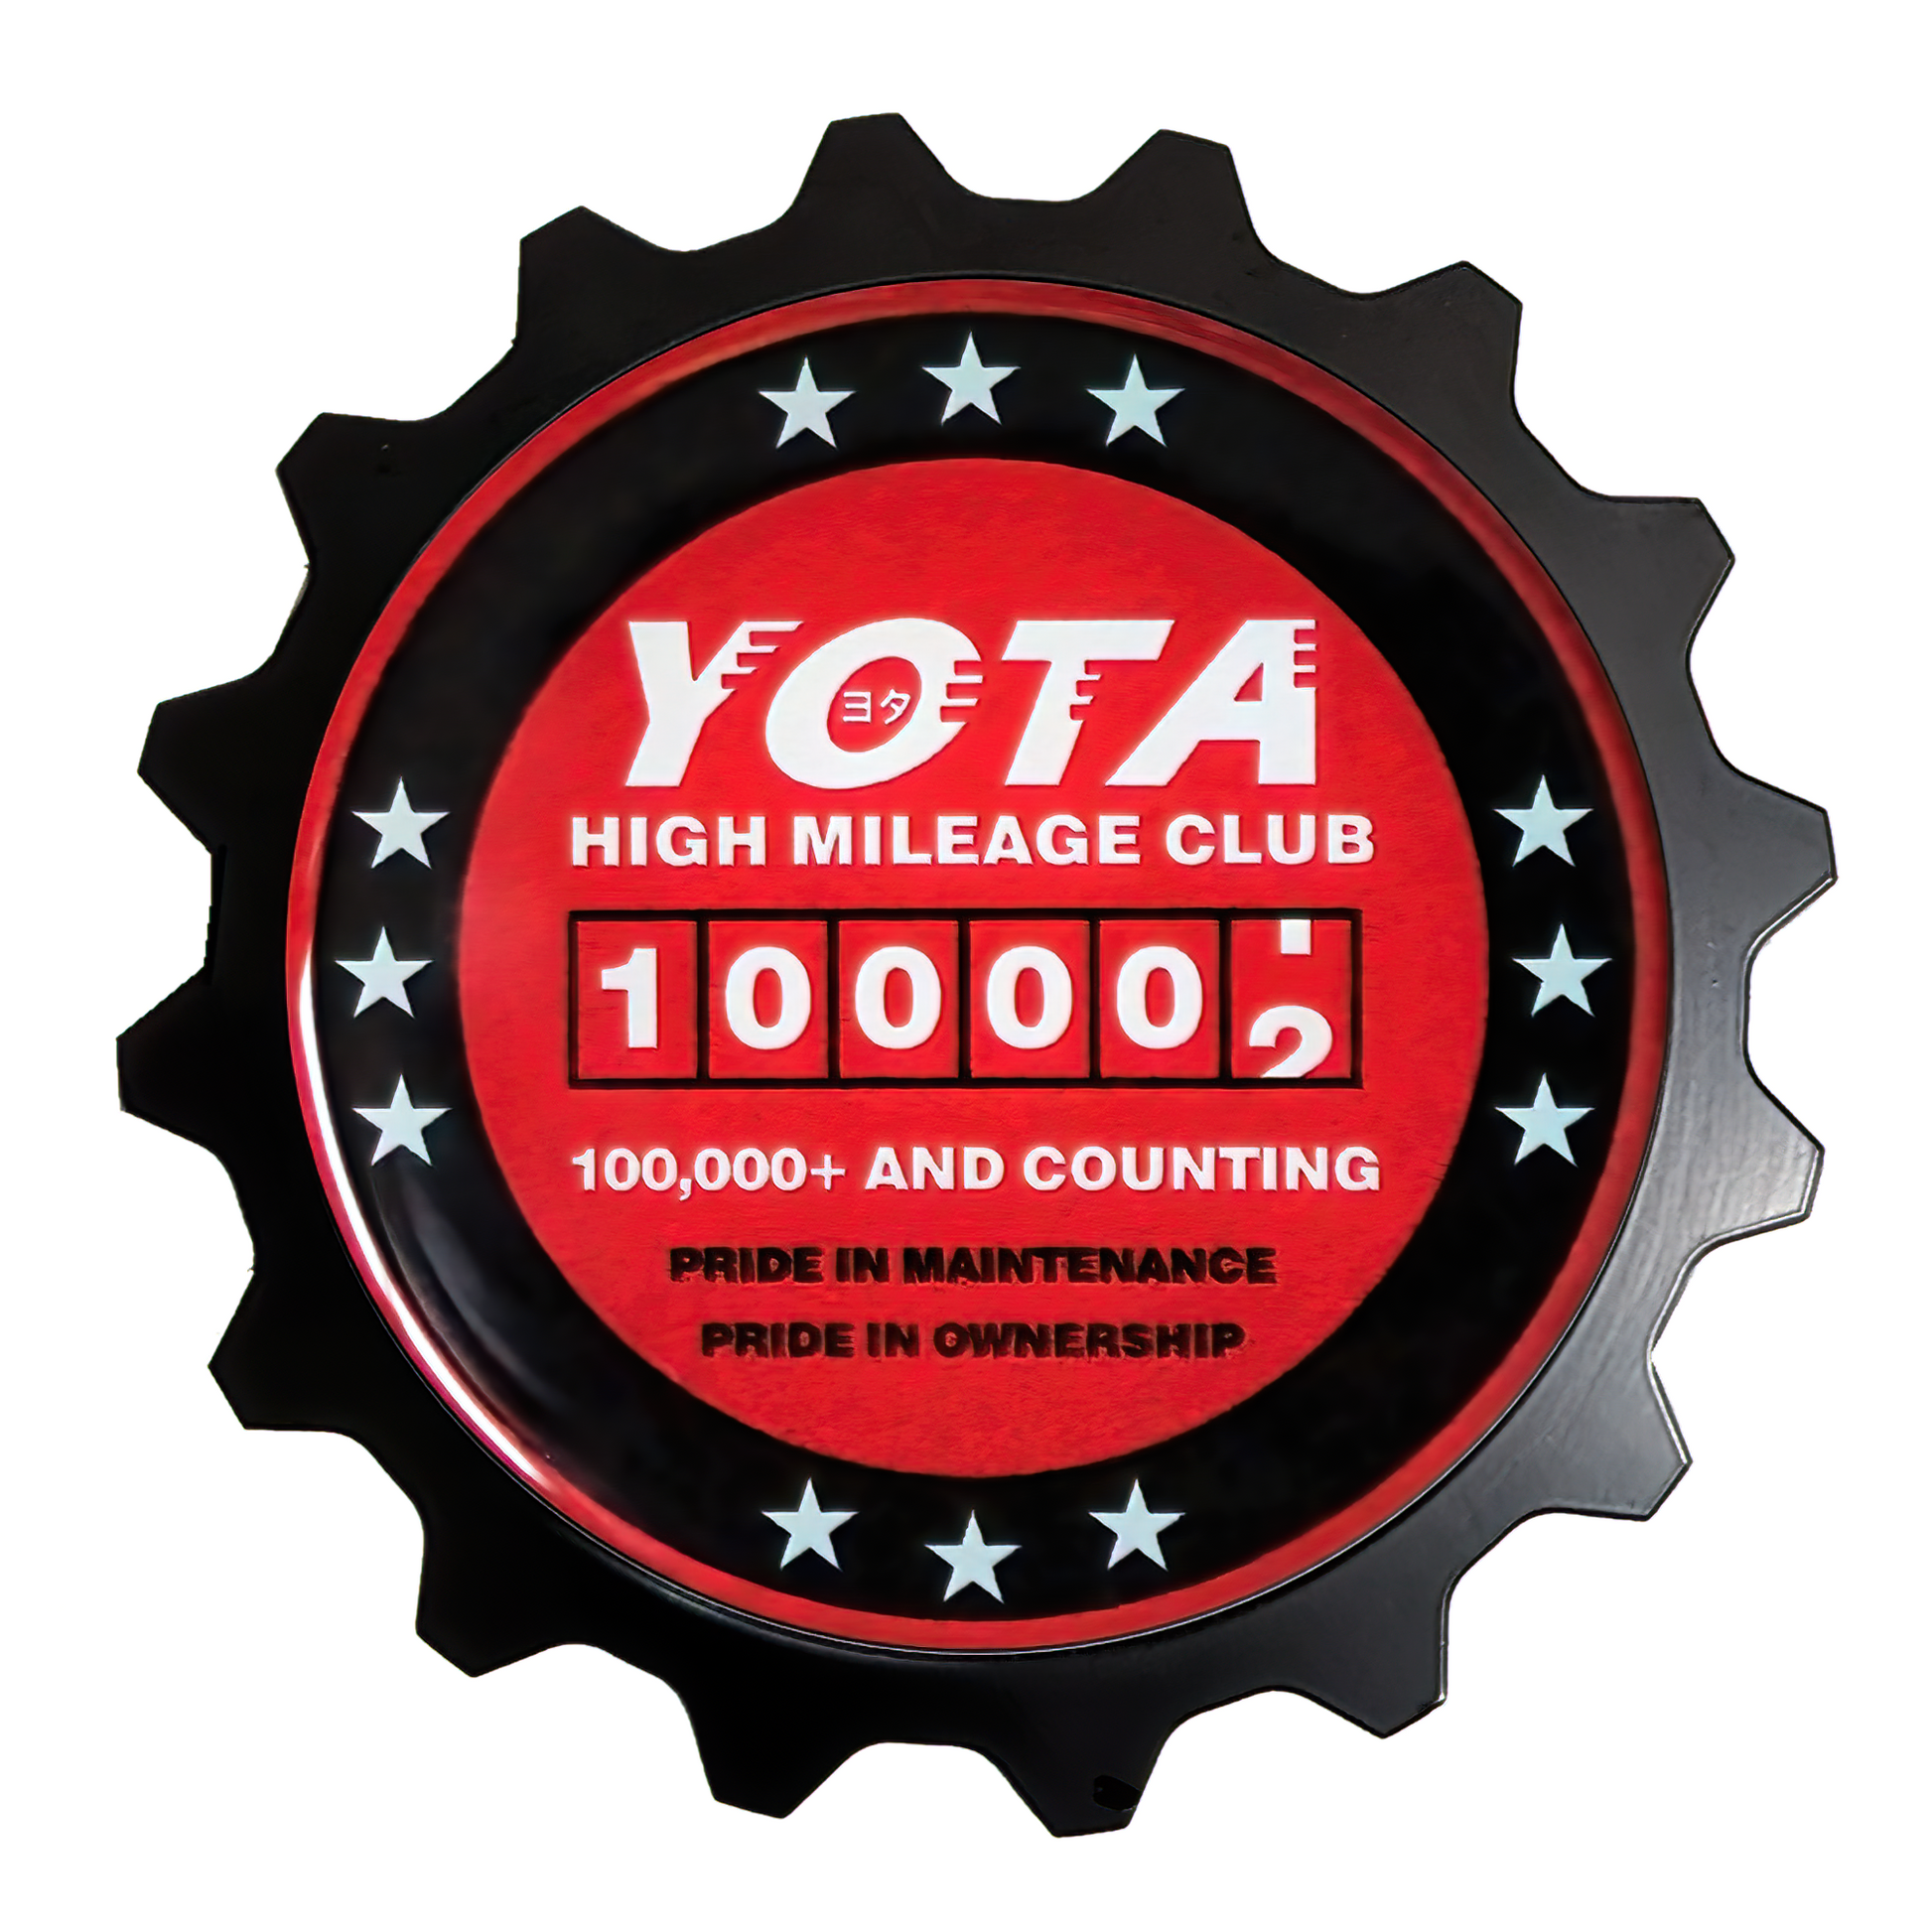 www.toyotahighmileageclub.com Yota High Miles Club Badge For Toyota Owners, High Mileage 100K is something to celebrate! If you hit the 100,000 mile mark in your reliable Toyota this is the badge of honor for you. We also have this design in a patch and decal sticker.